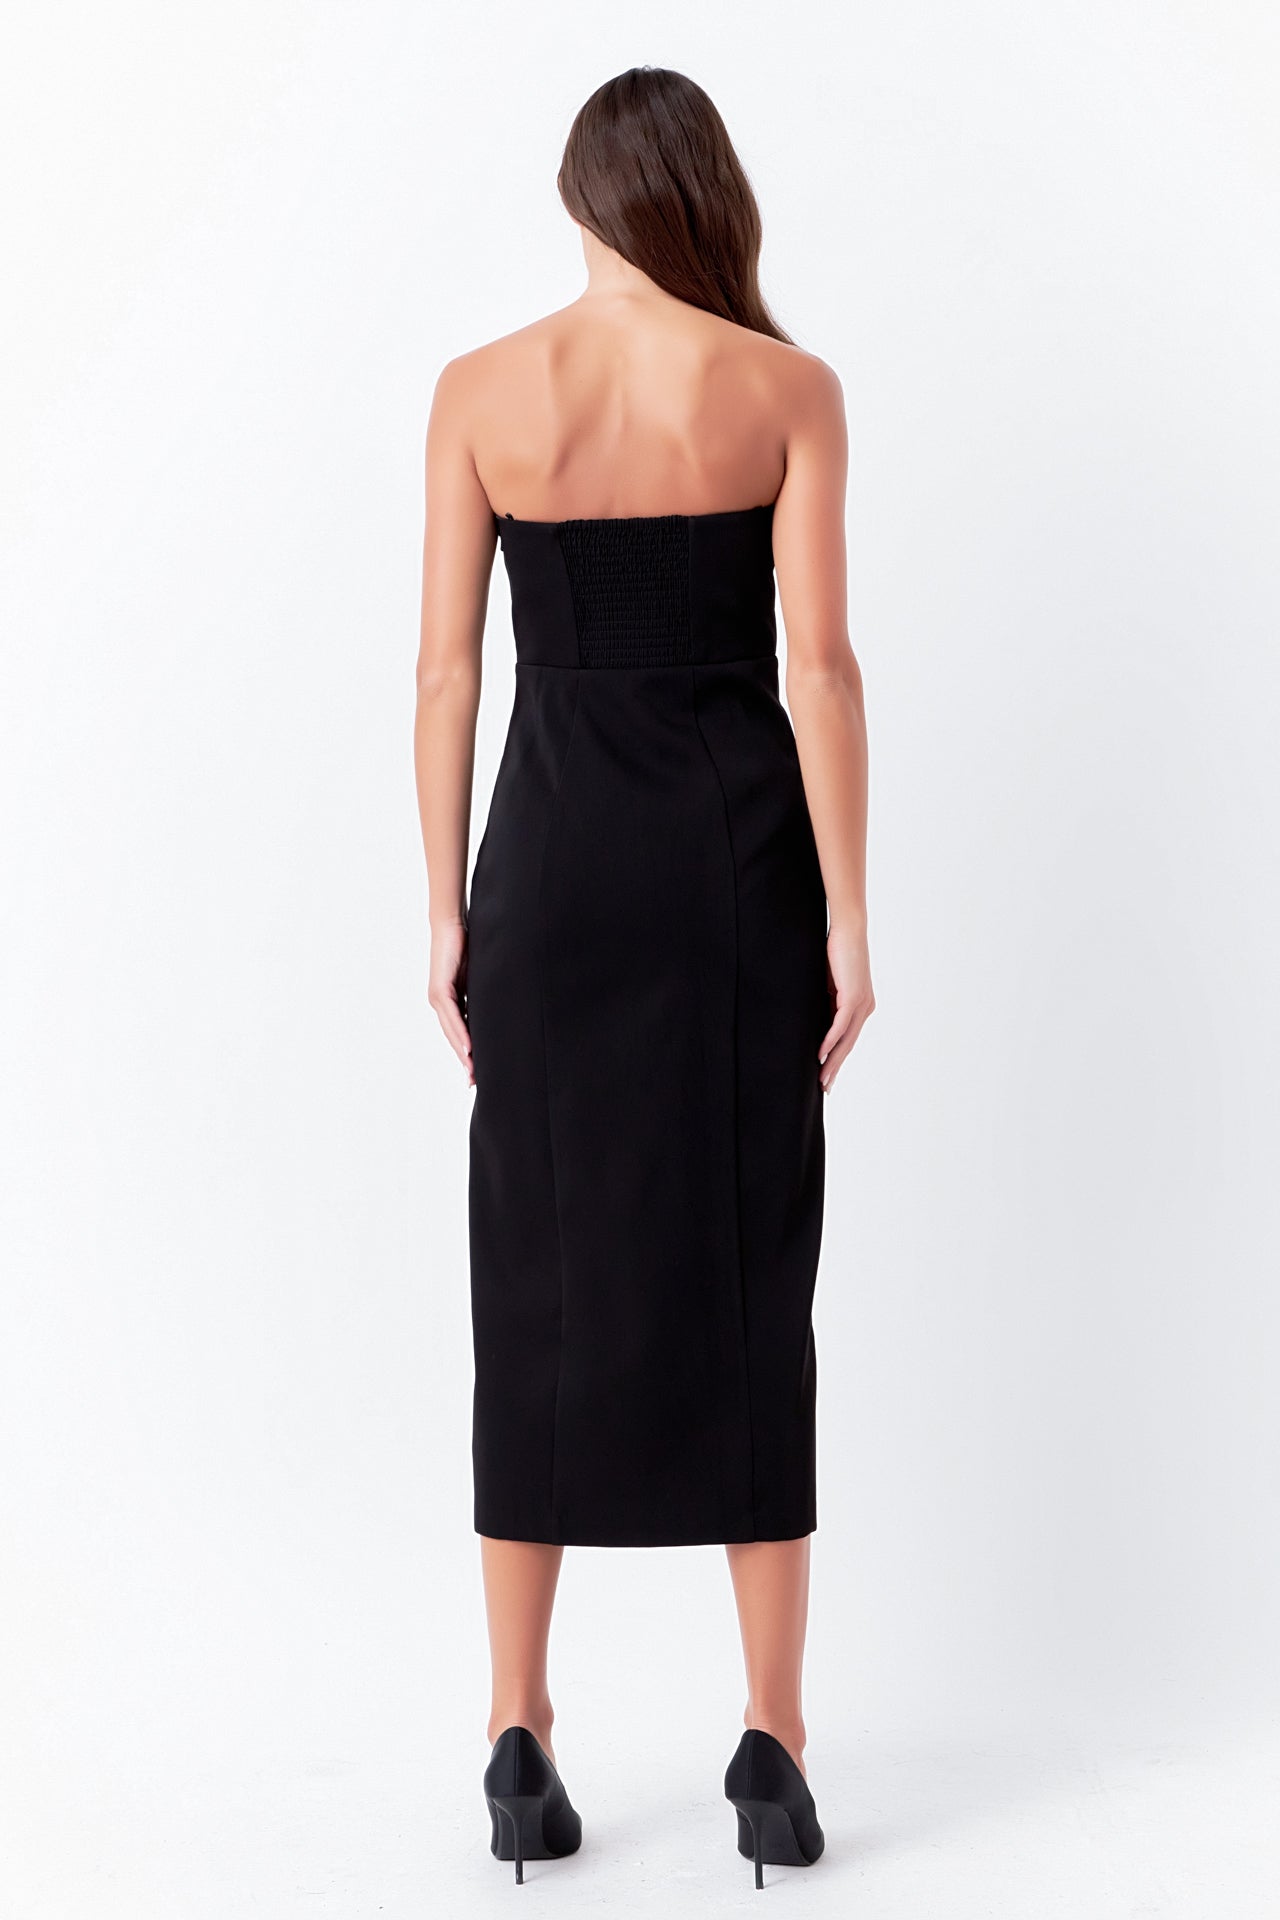 ENDLESS ROSE - Strapless Midi Dress - DRESSES available at Objectrare